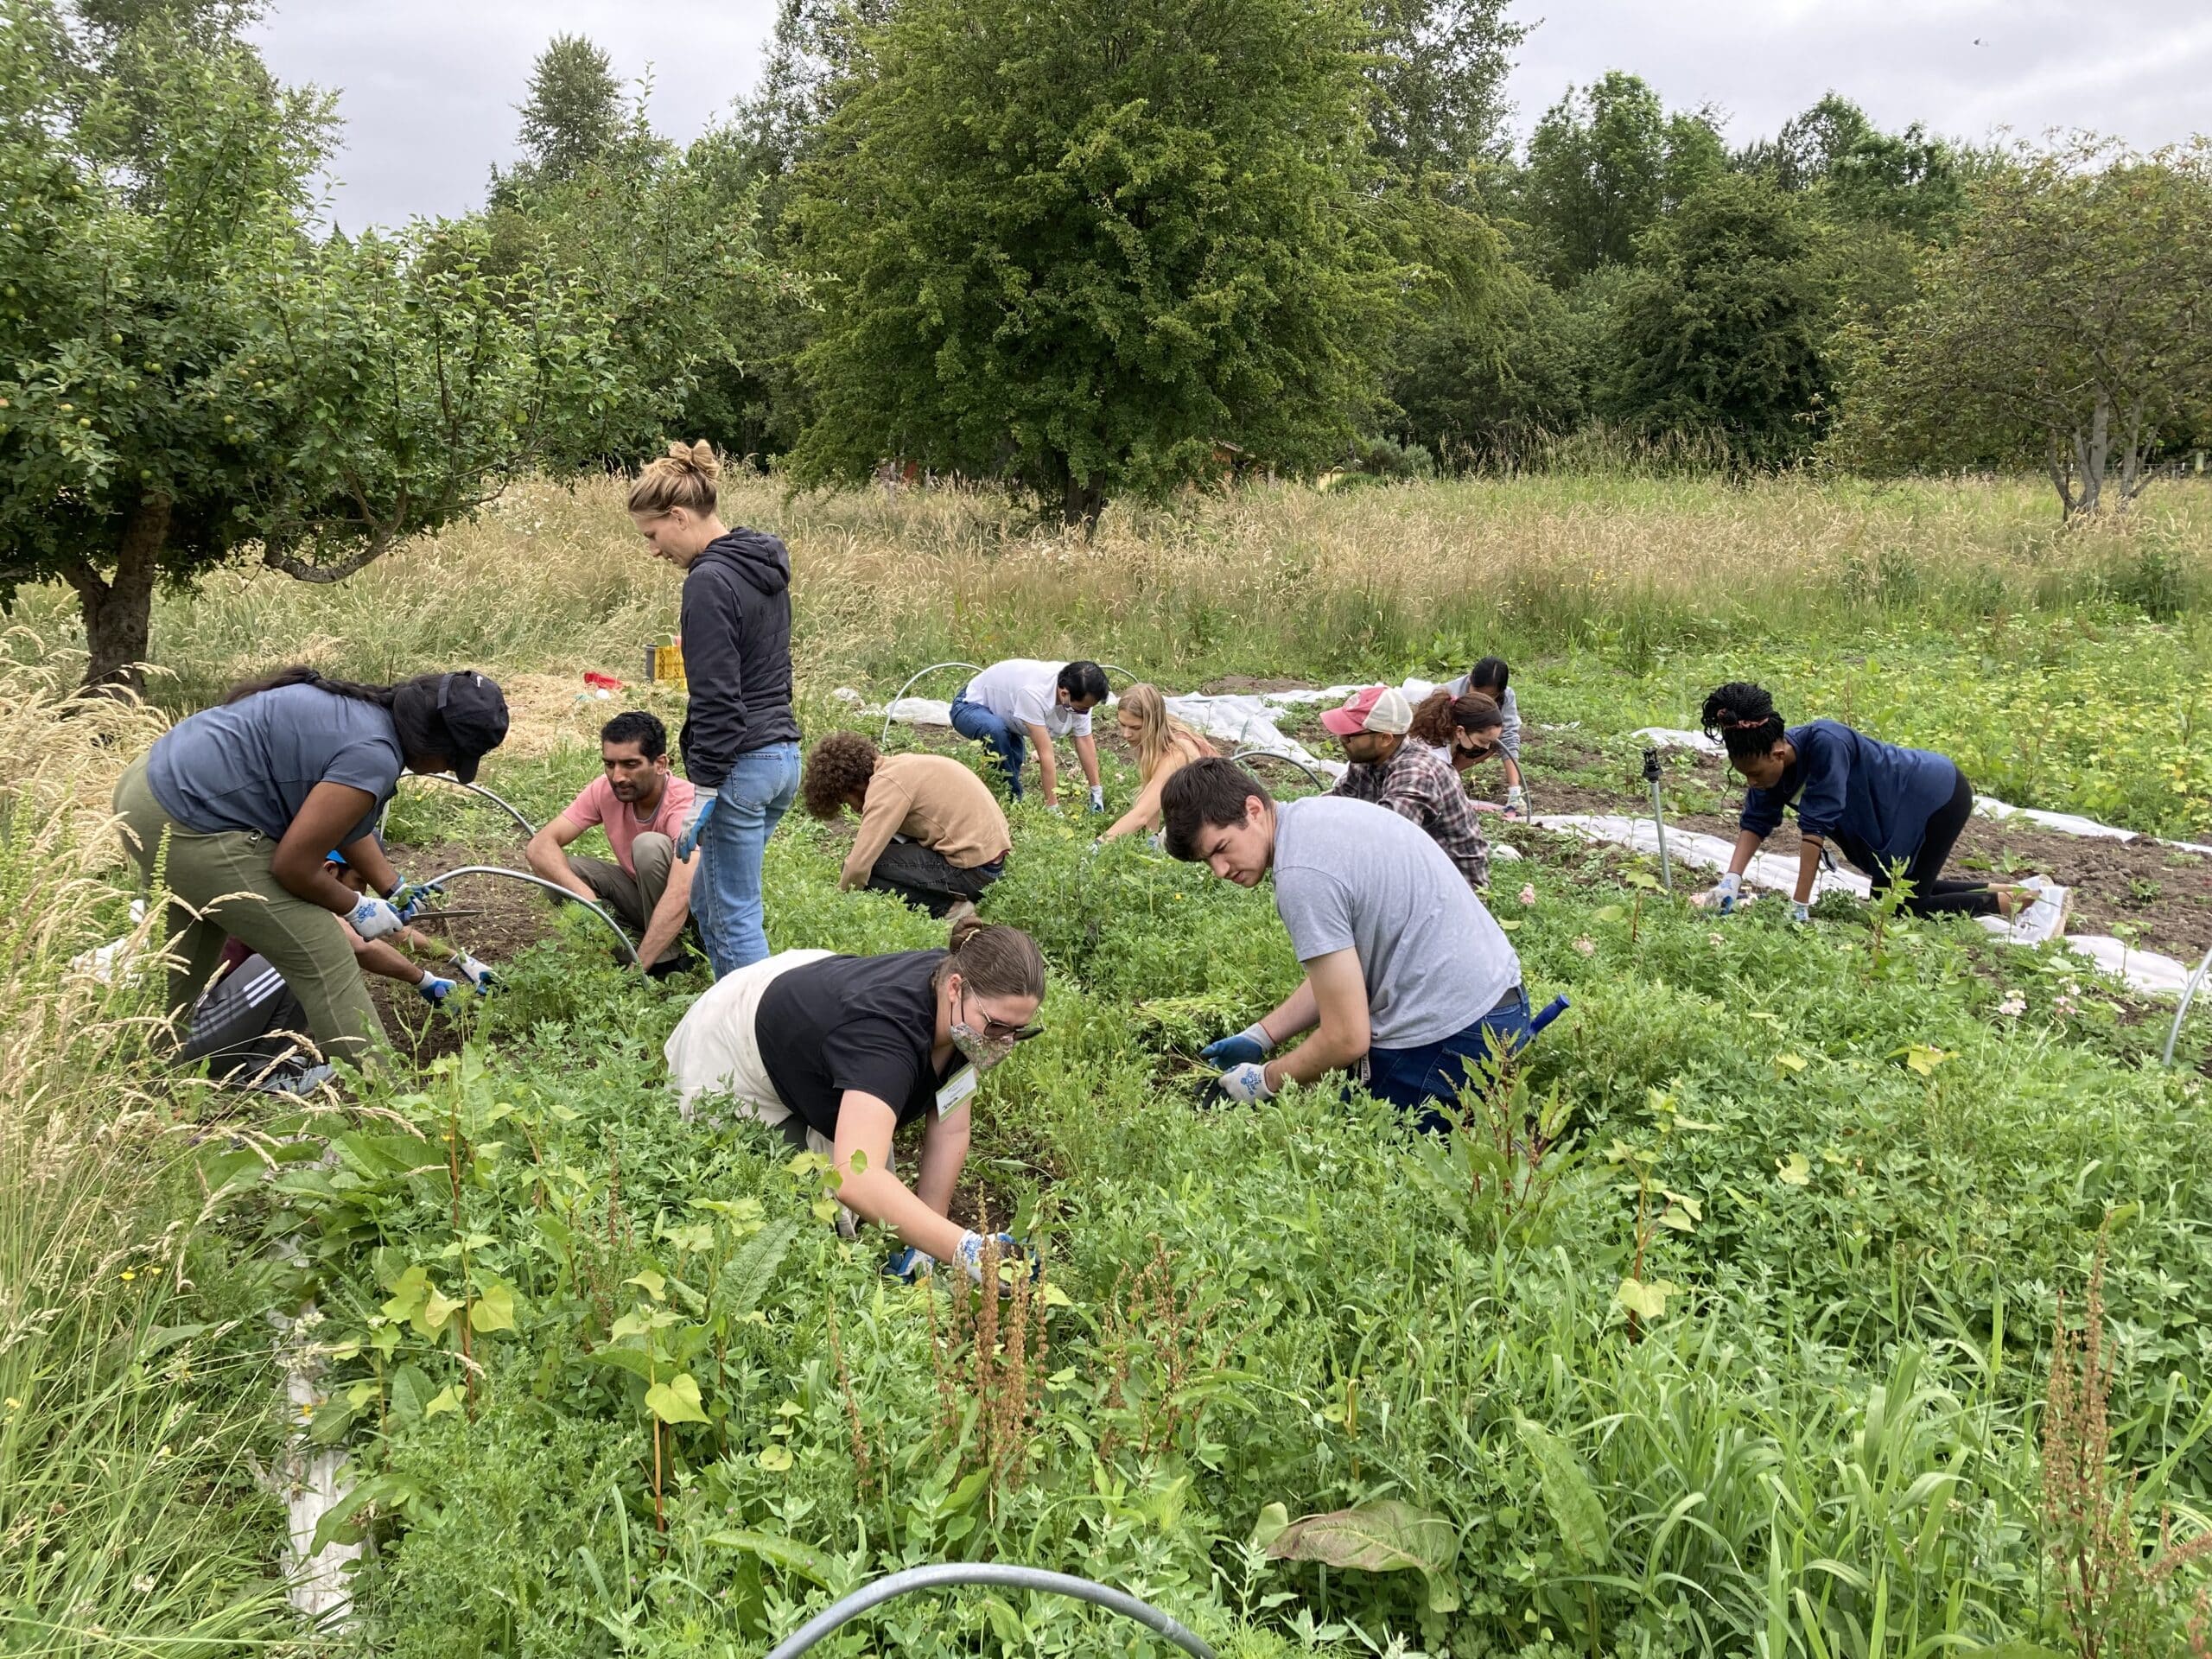 Volunteers help weed a production field on the 21 Acres farm.